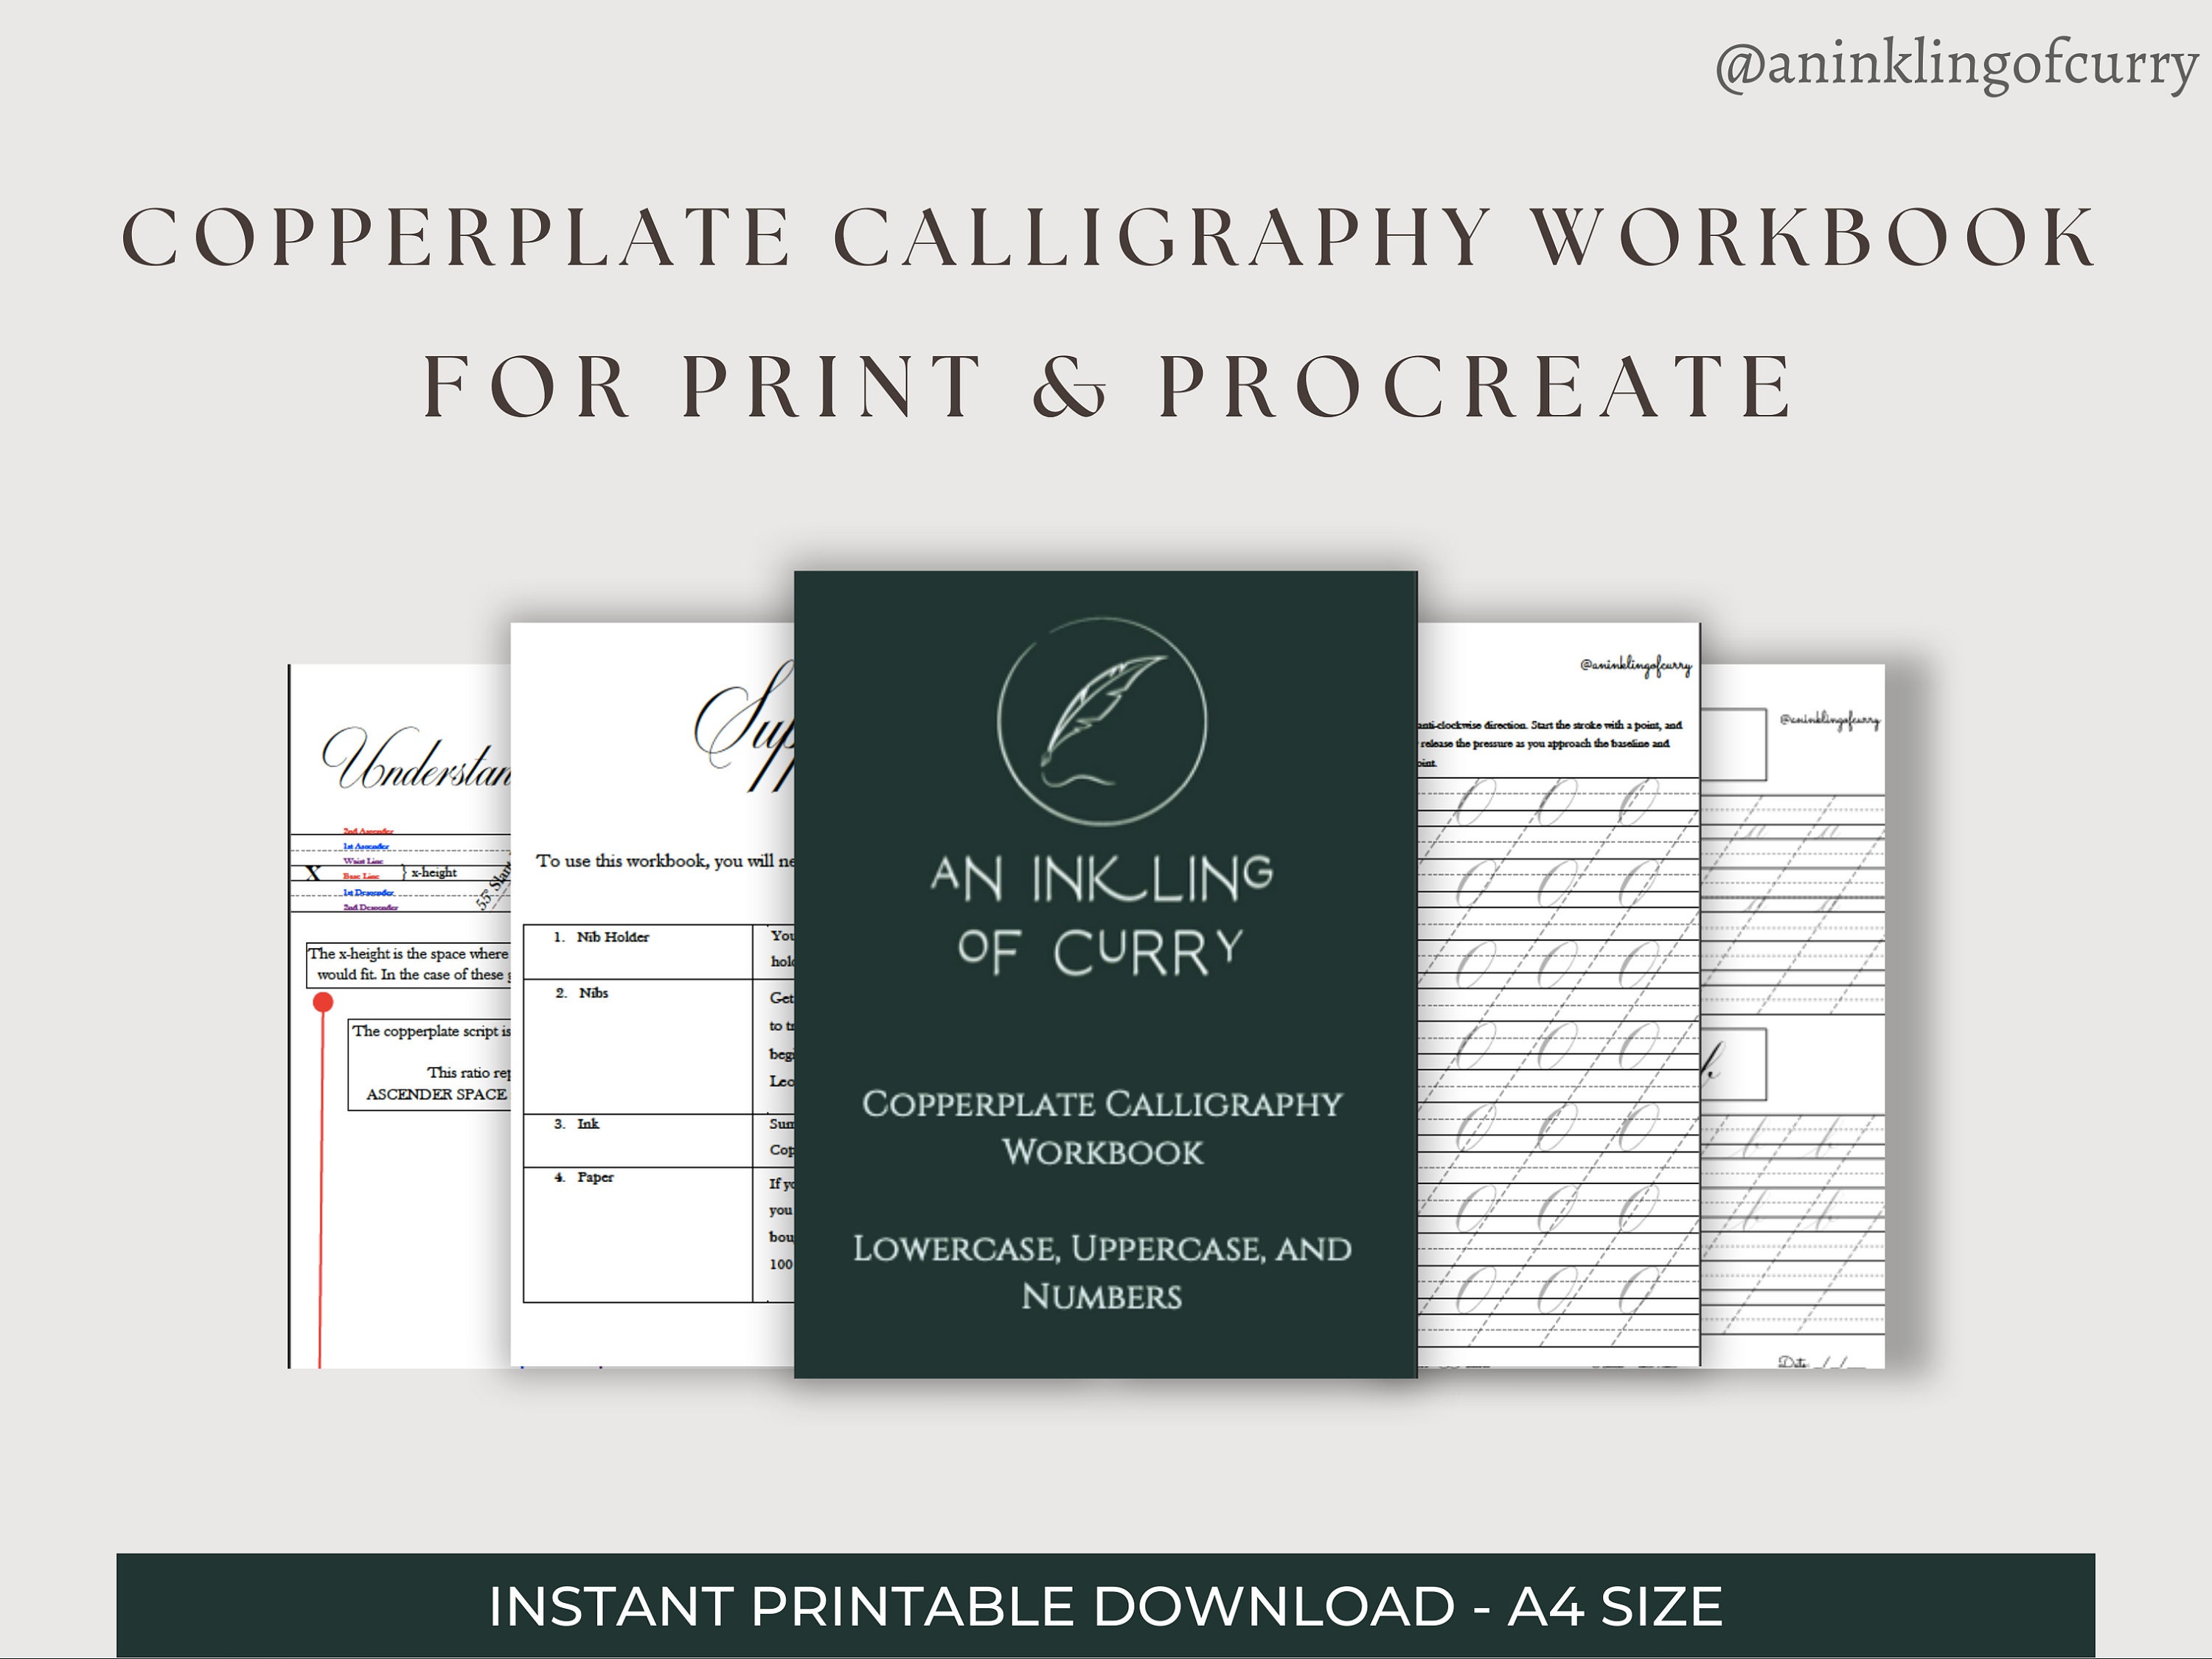 55 Degree Guide Sheets. Calligraphy Paper Stock Vector